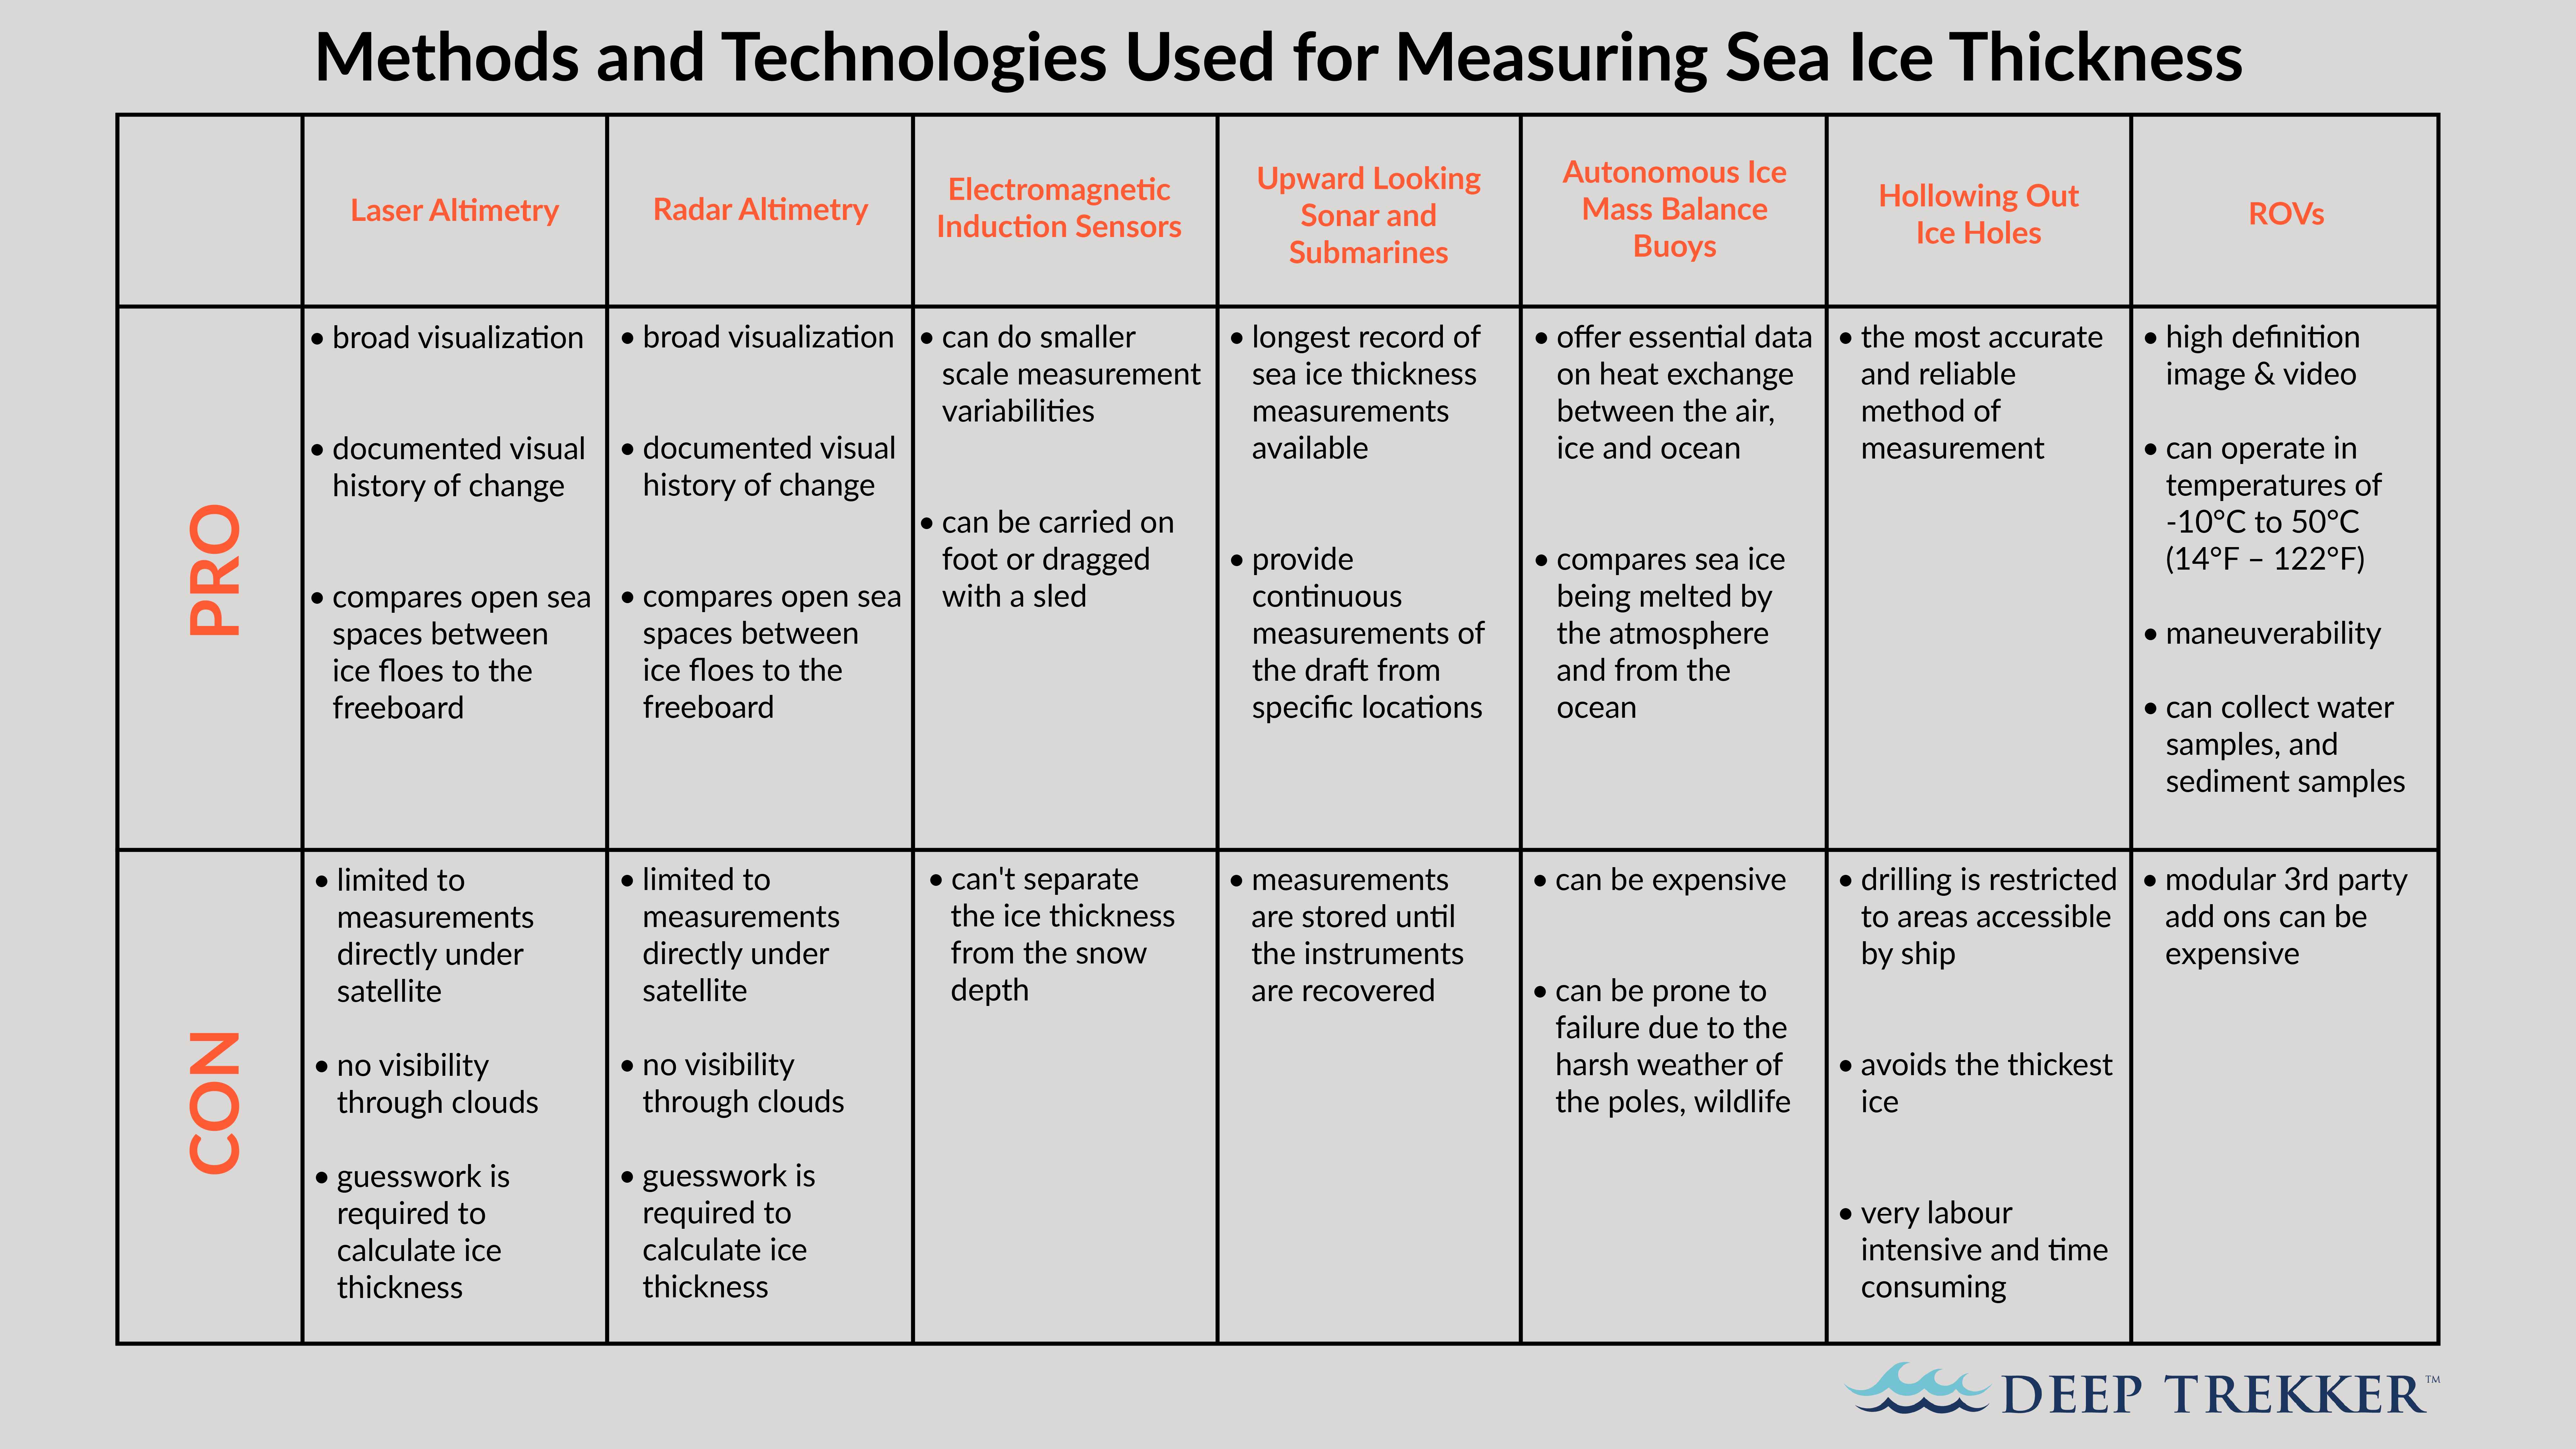 Methods and Technologies Used for Measuring Sea Ice Thickness chart